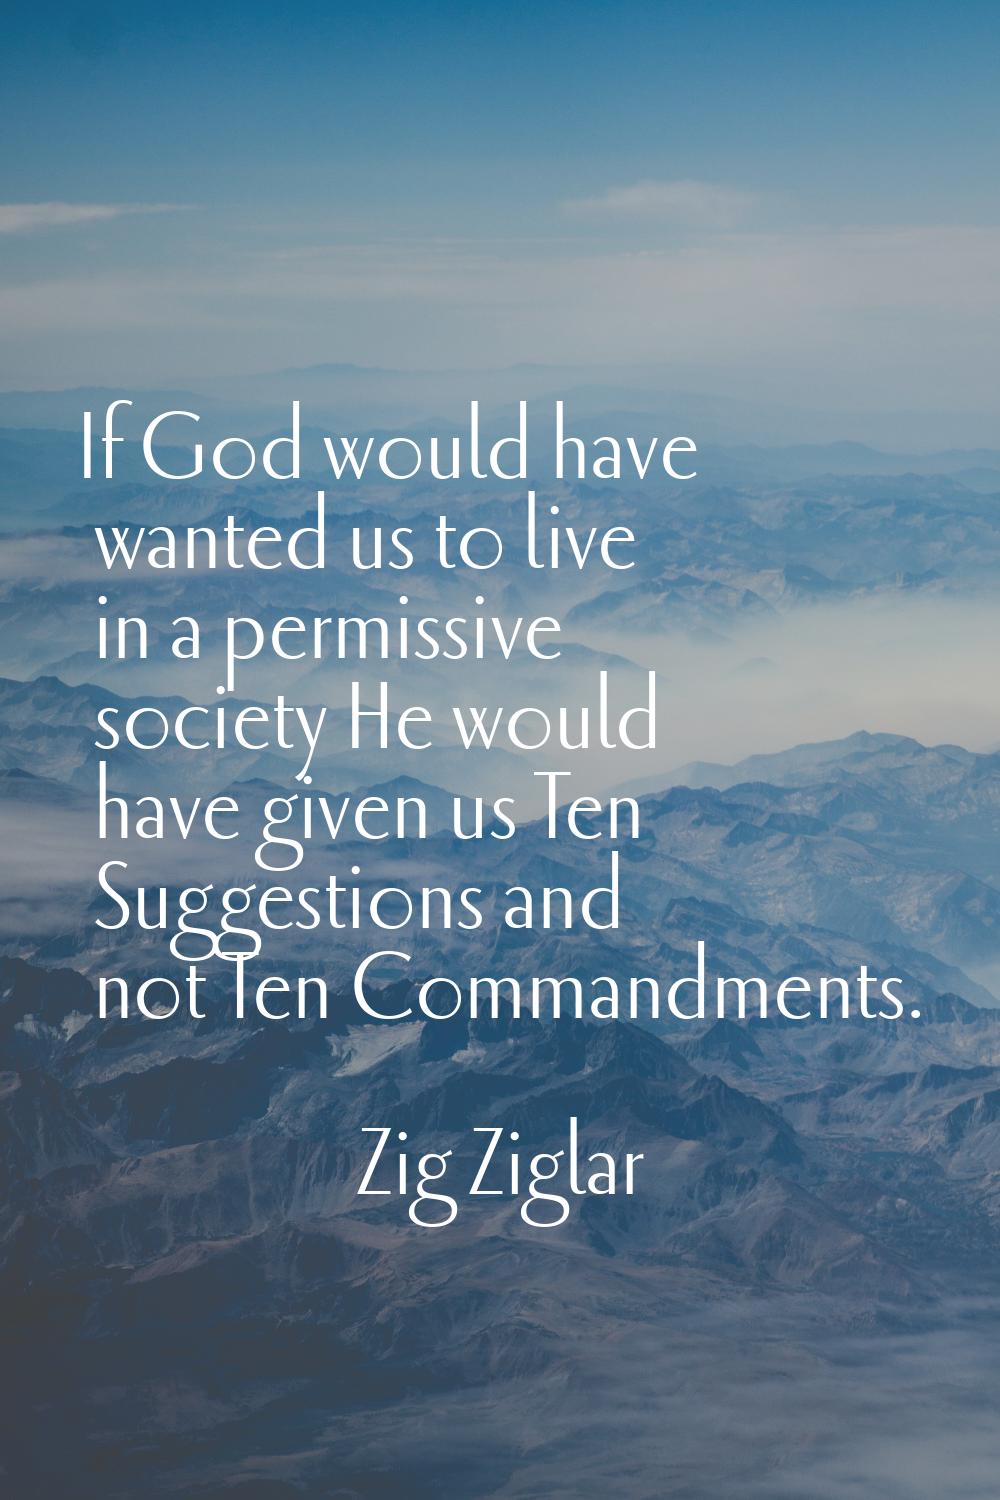 If God would have wanted us to live in a permissive society He would have given us Ten Suggestions 